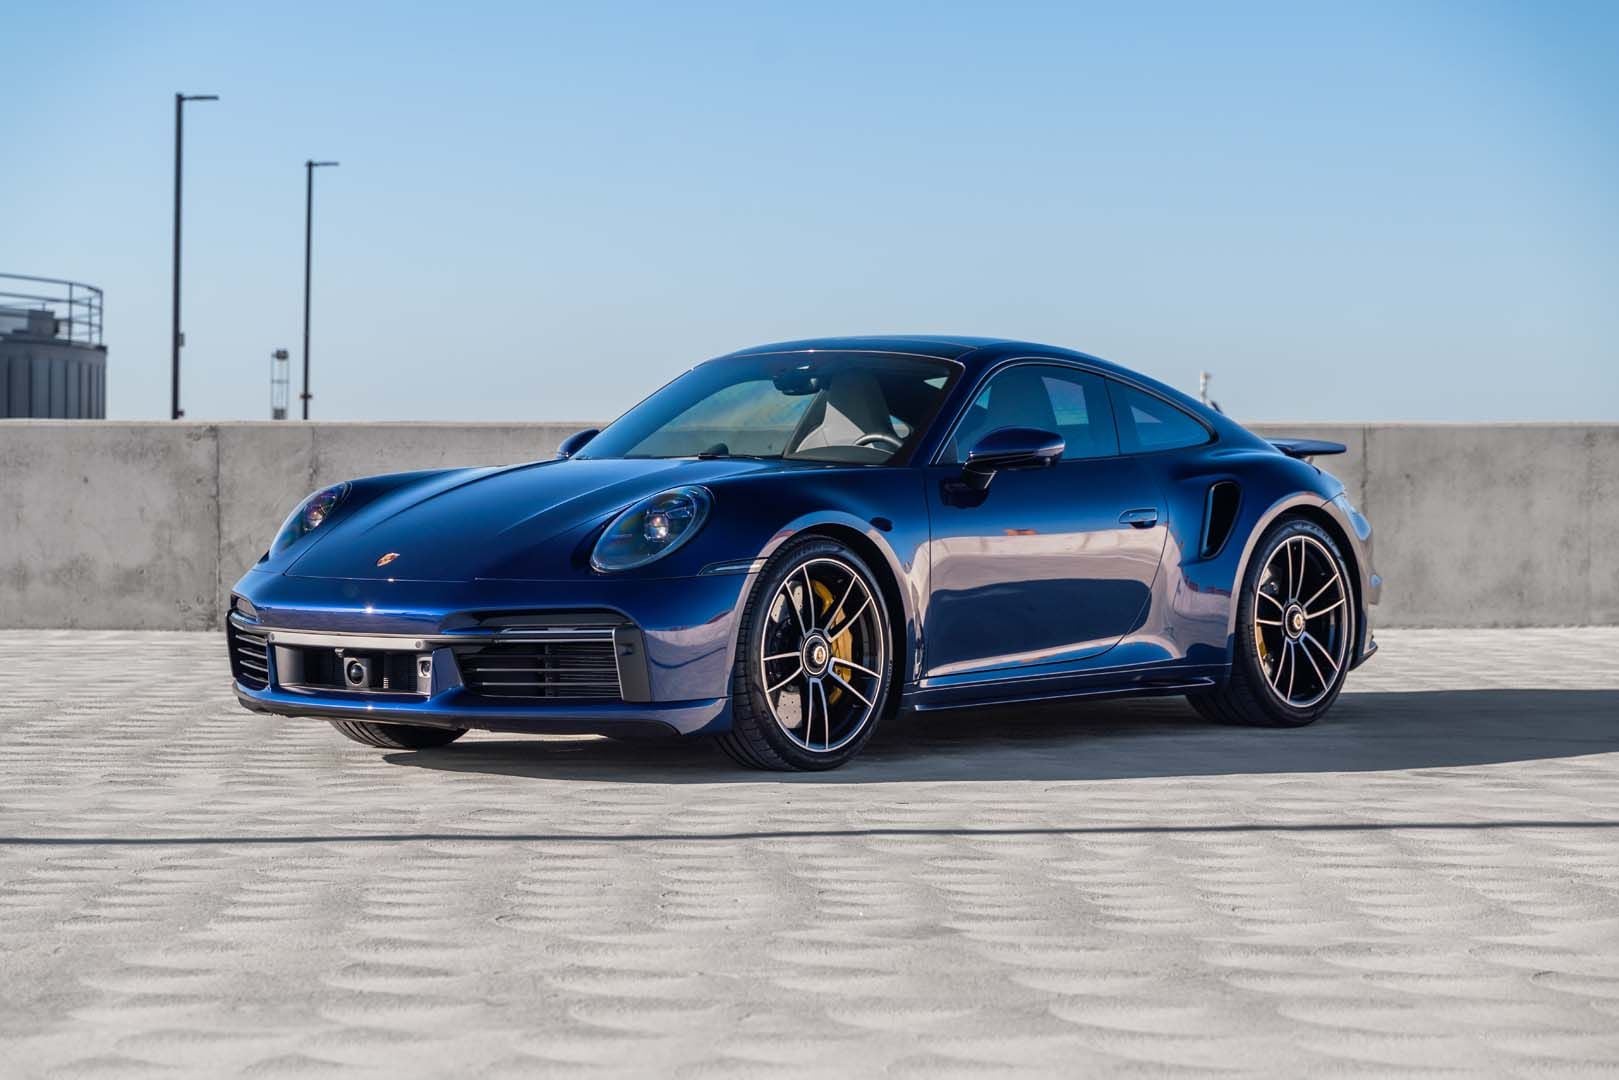 2021 Porsche 911 - 2021 Gentian Blue Turbo S for Sale - Used - VIN WP0AD2A95MS258204 - 4,932 Miles - 6 cyl - AWD - Automatic - Coupe - Blue - San Diego, CA 92130, United States